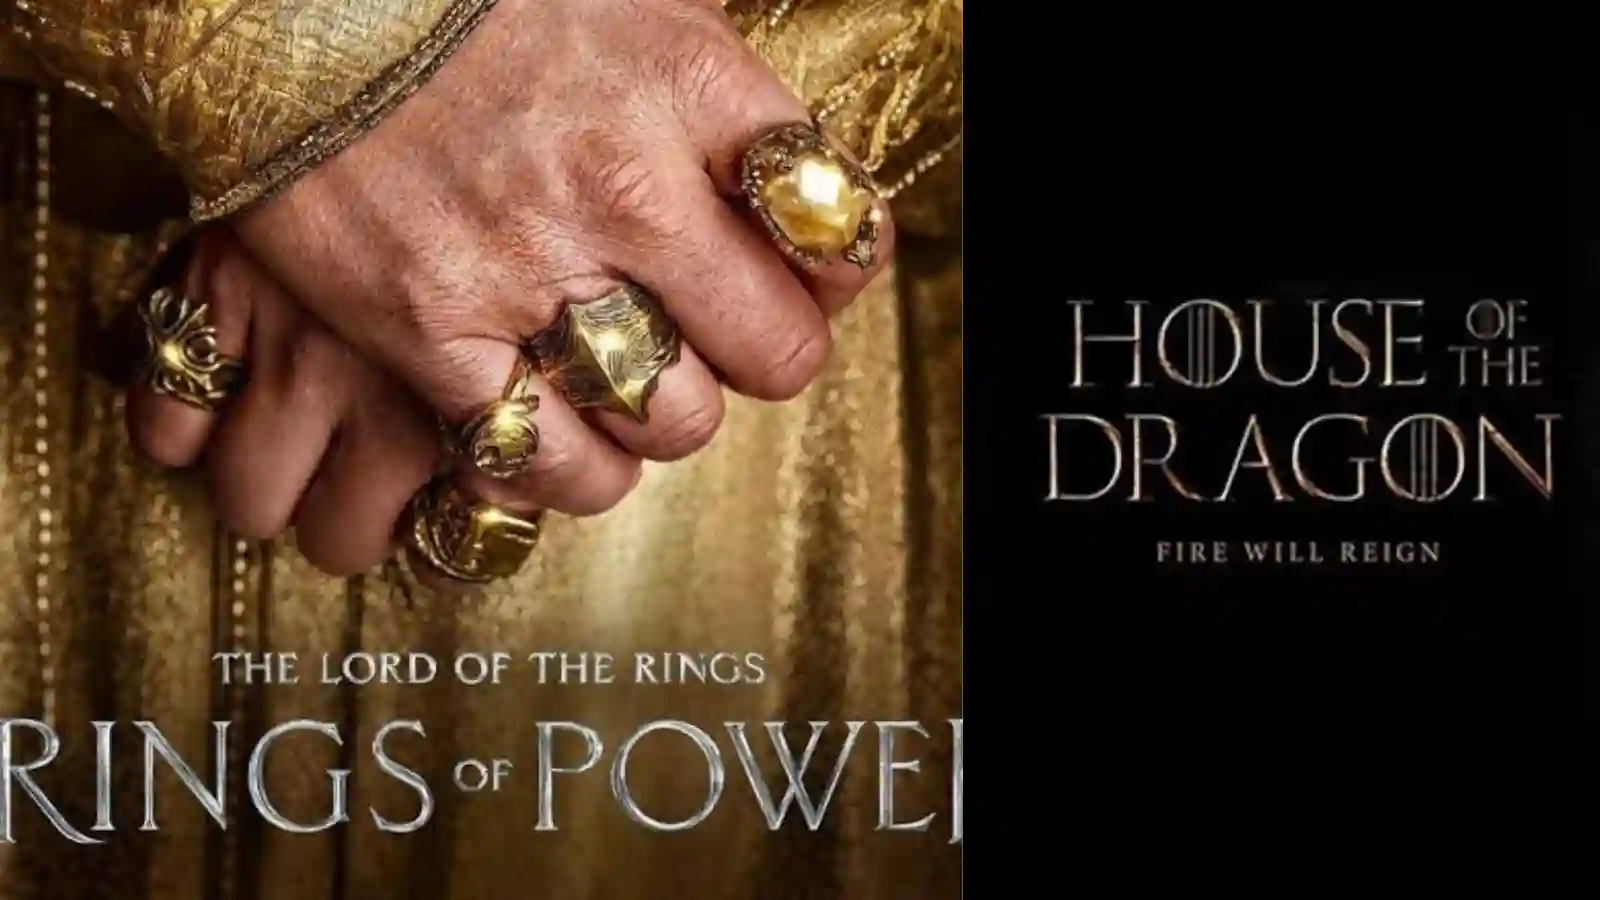 'House of the Dragon' Vs 'The Rings of Power'